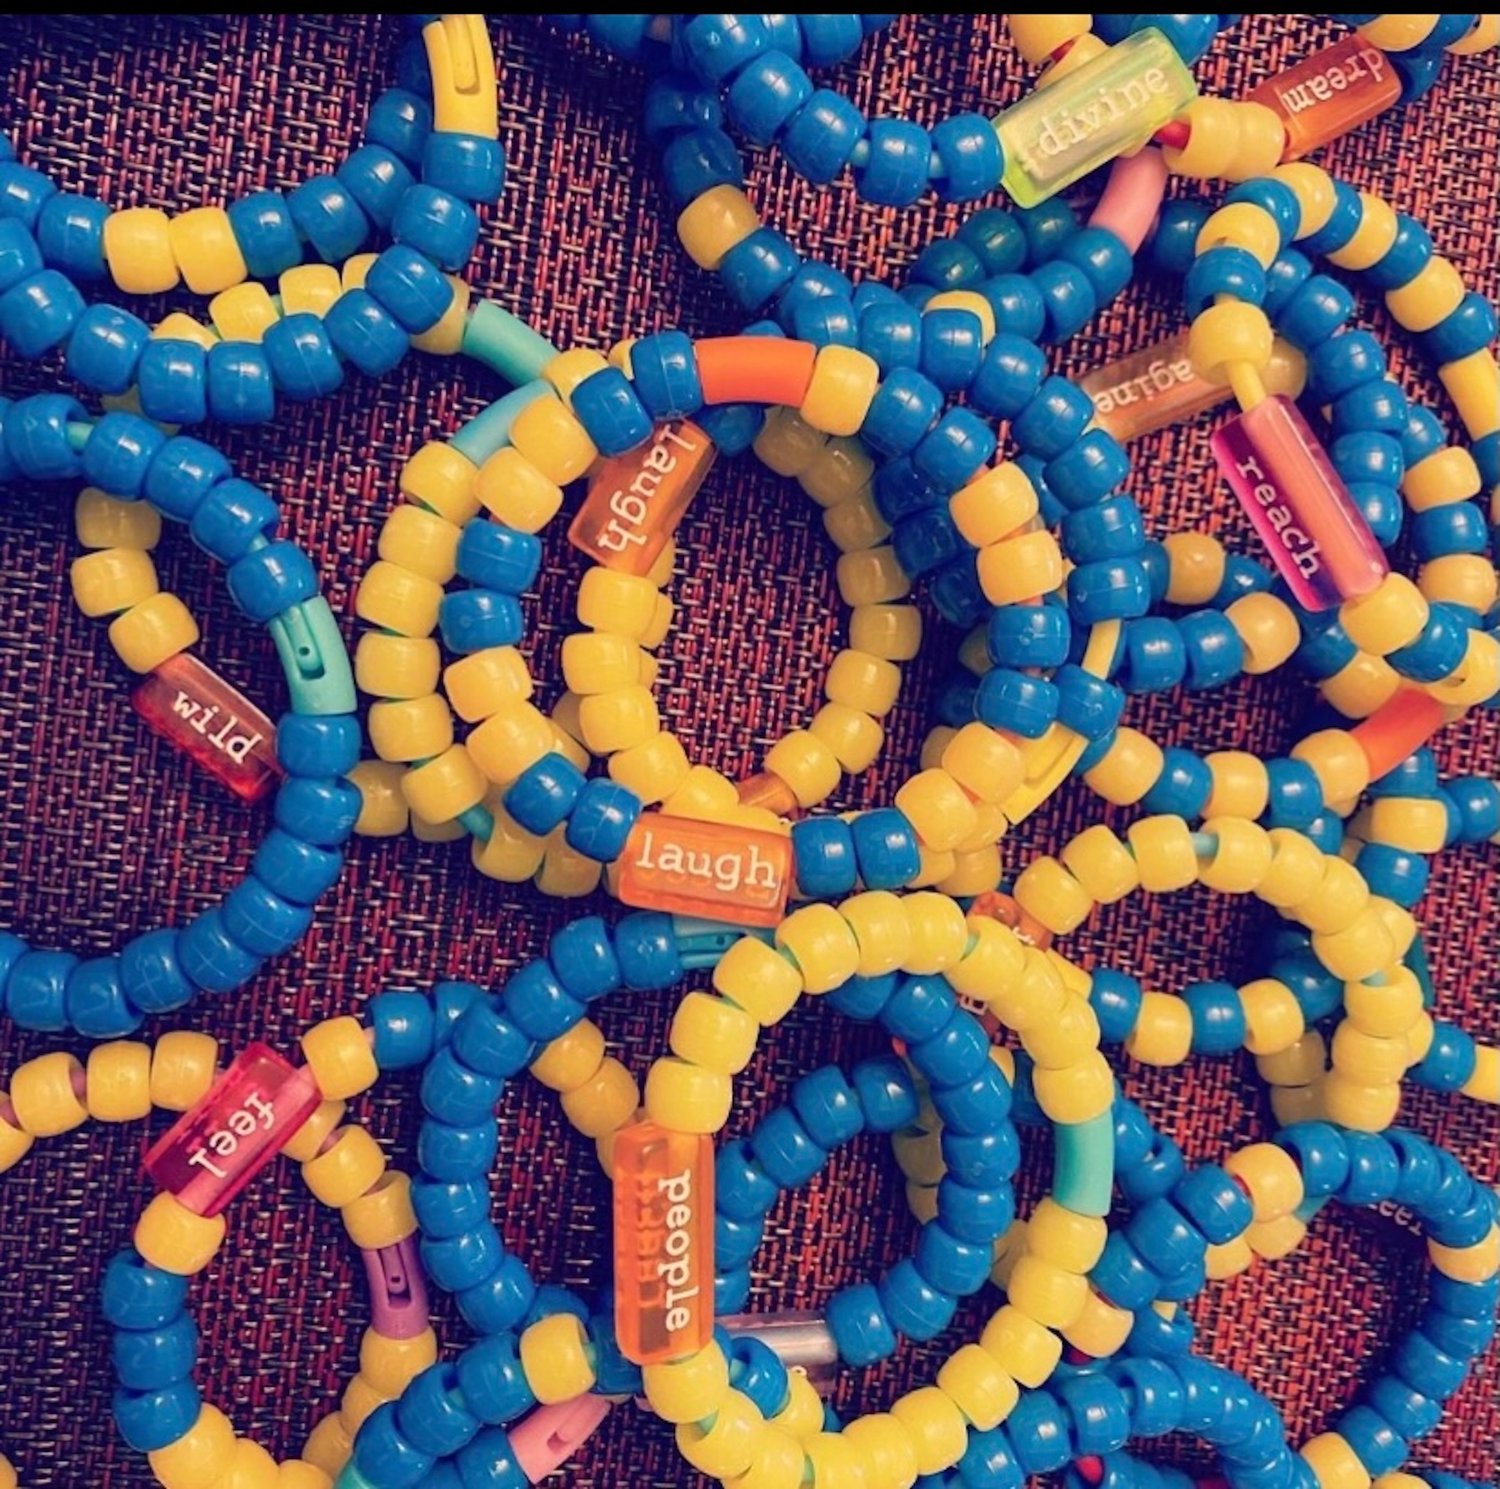 The girls sold a variety of items, including beaded bracelets with positive words on them.